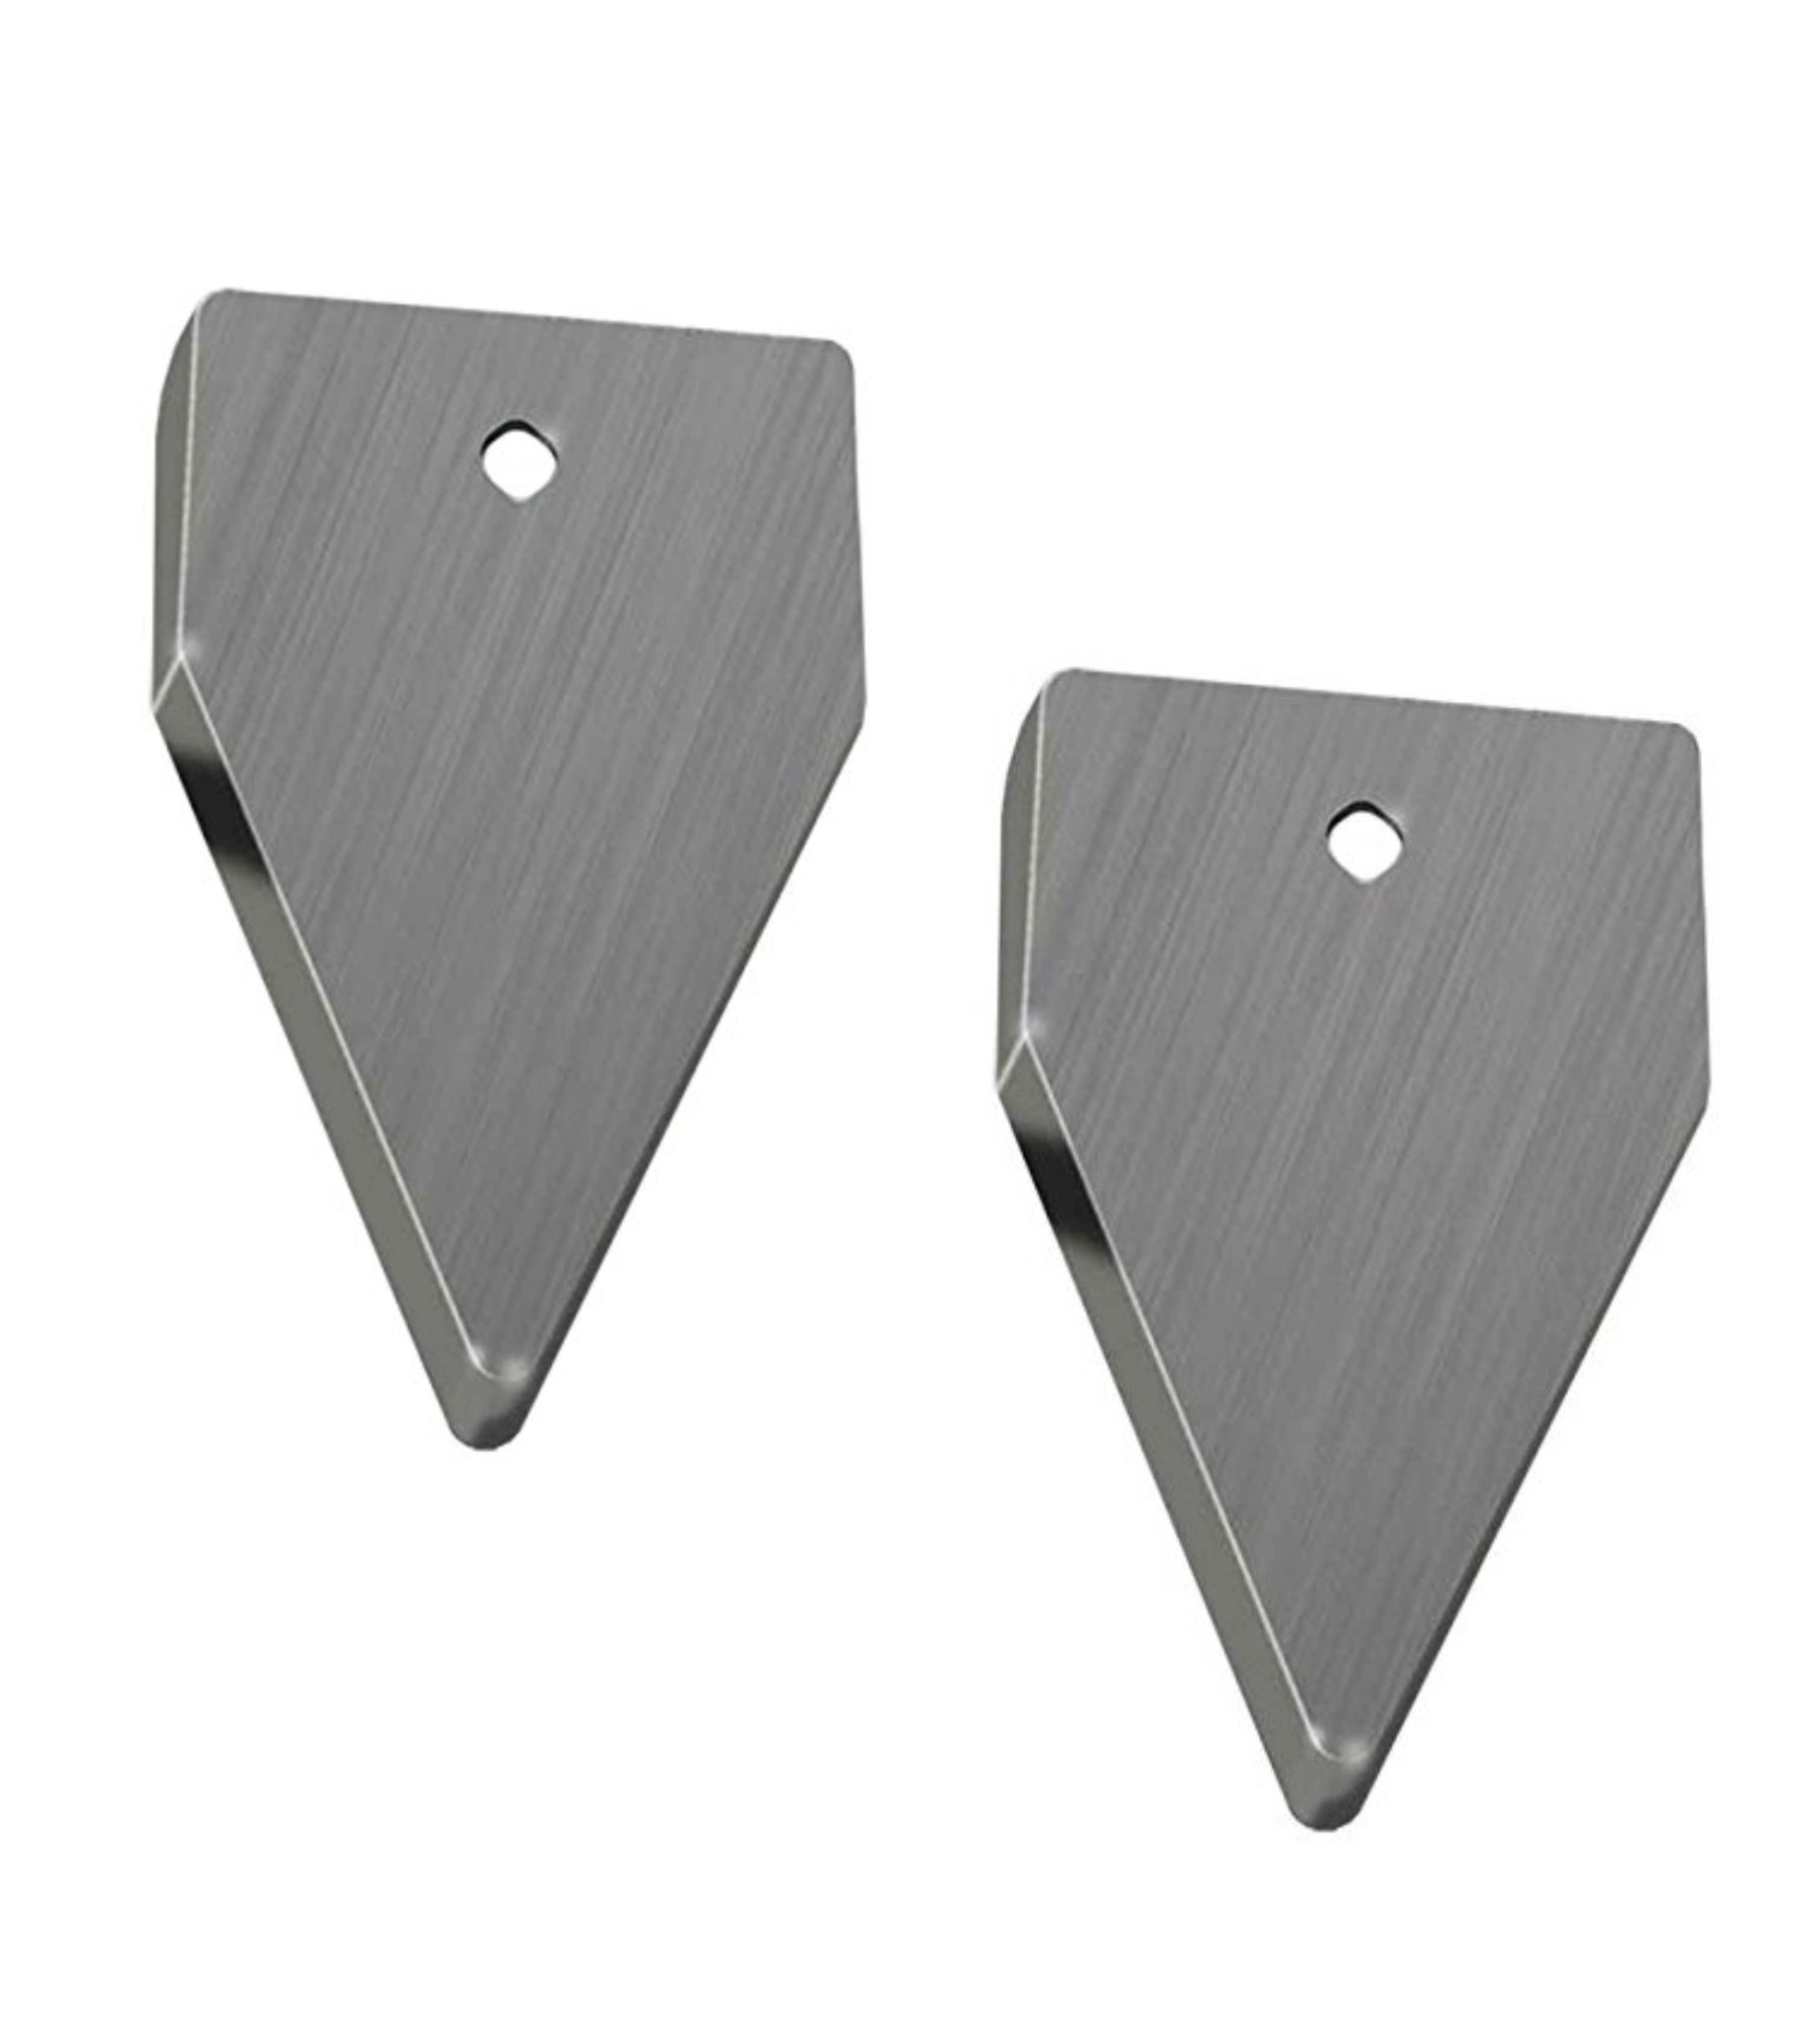 http://www.traveluniverse.com.au/Shared/Images/Product/Victorinox-Replacement-Blades-for-Knife-Sharpener-7-8715/7.8715.03.jpg